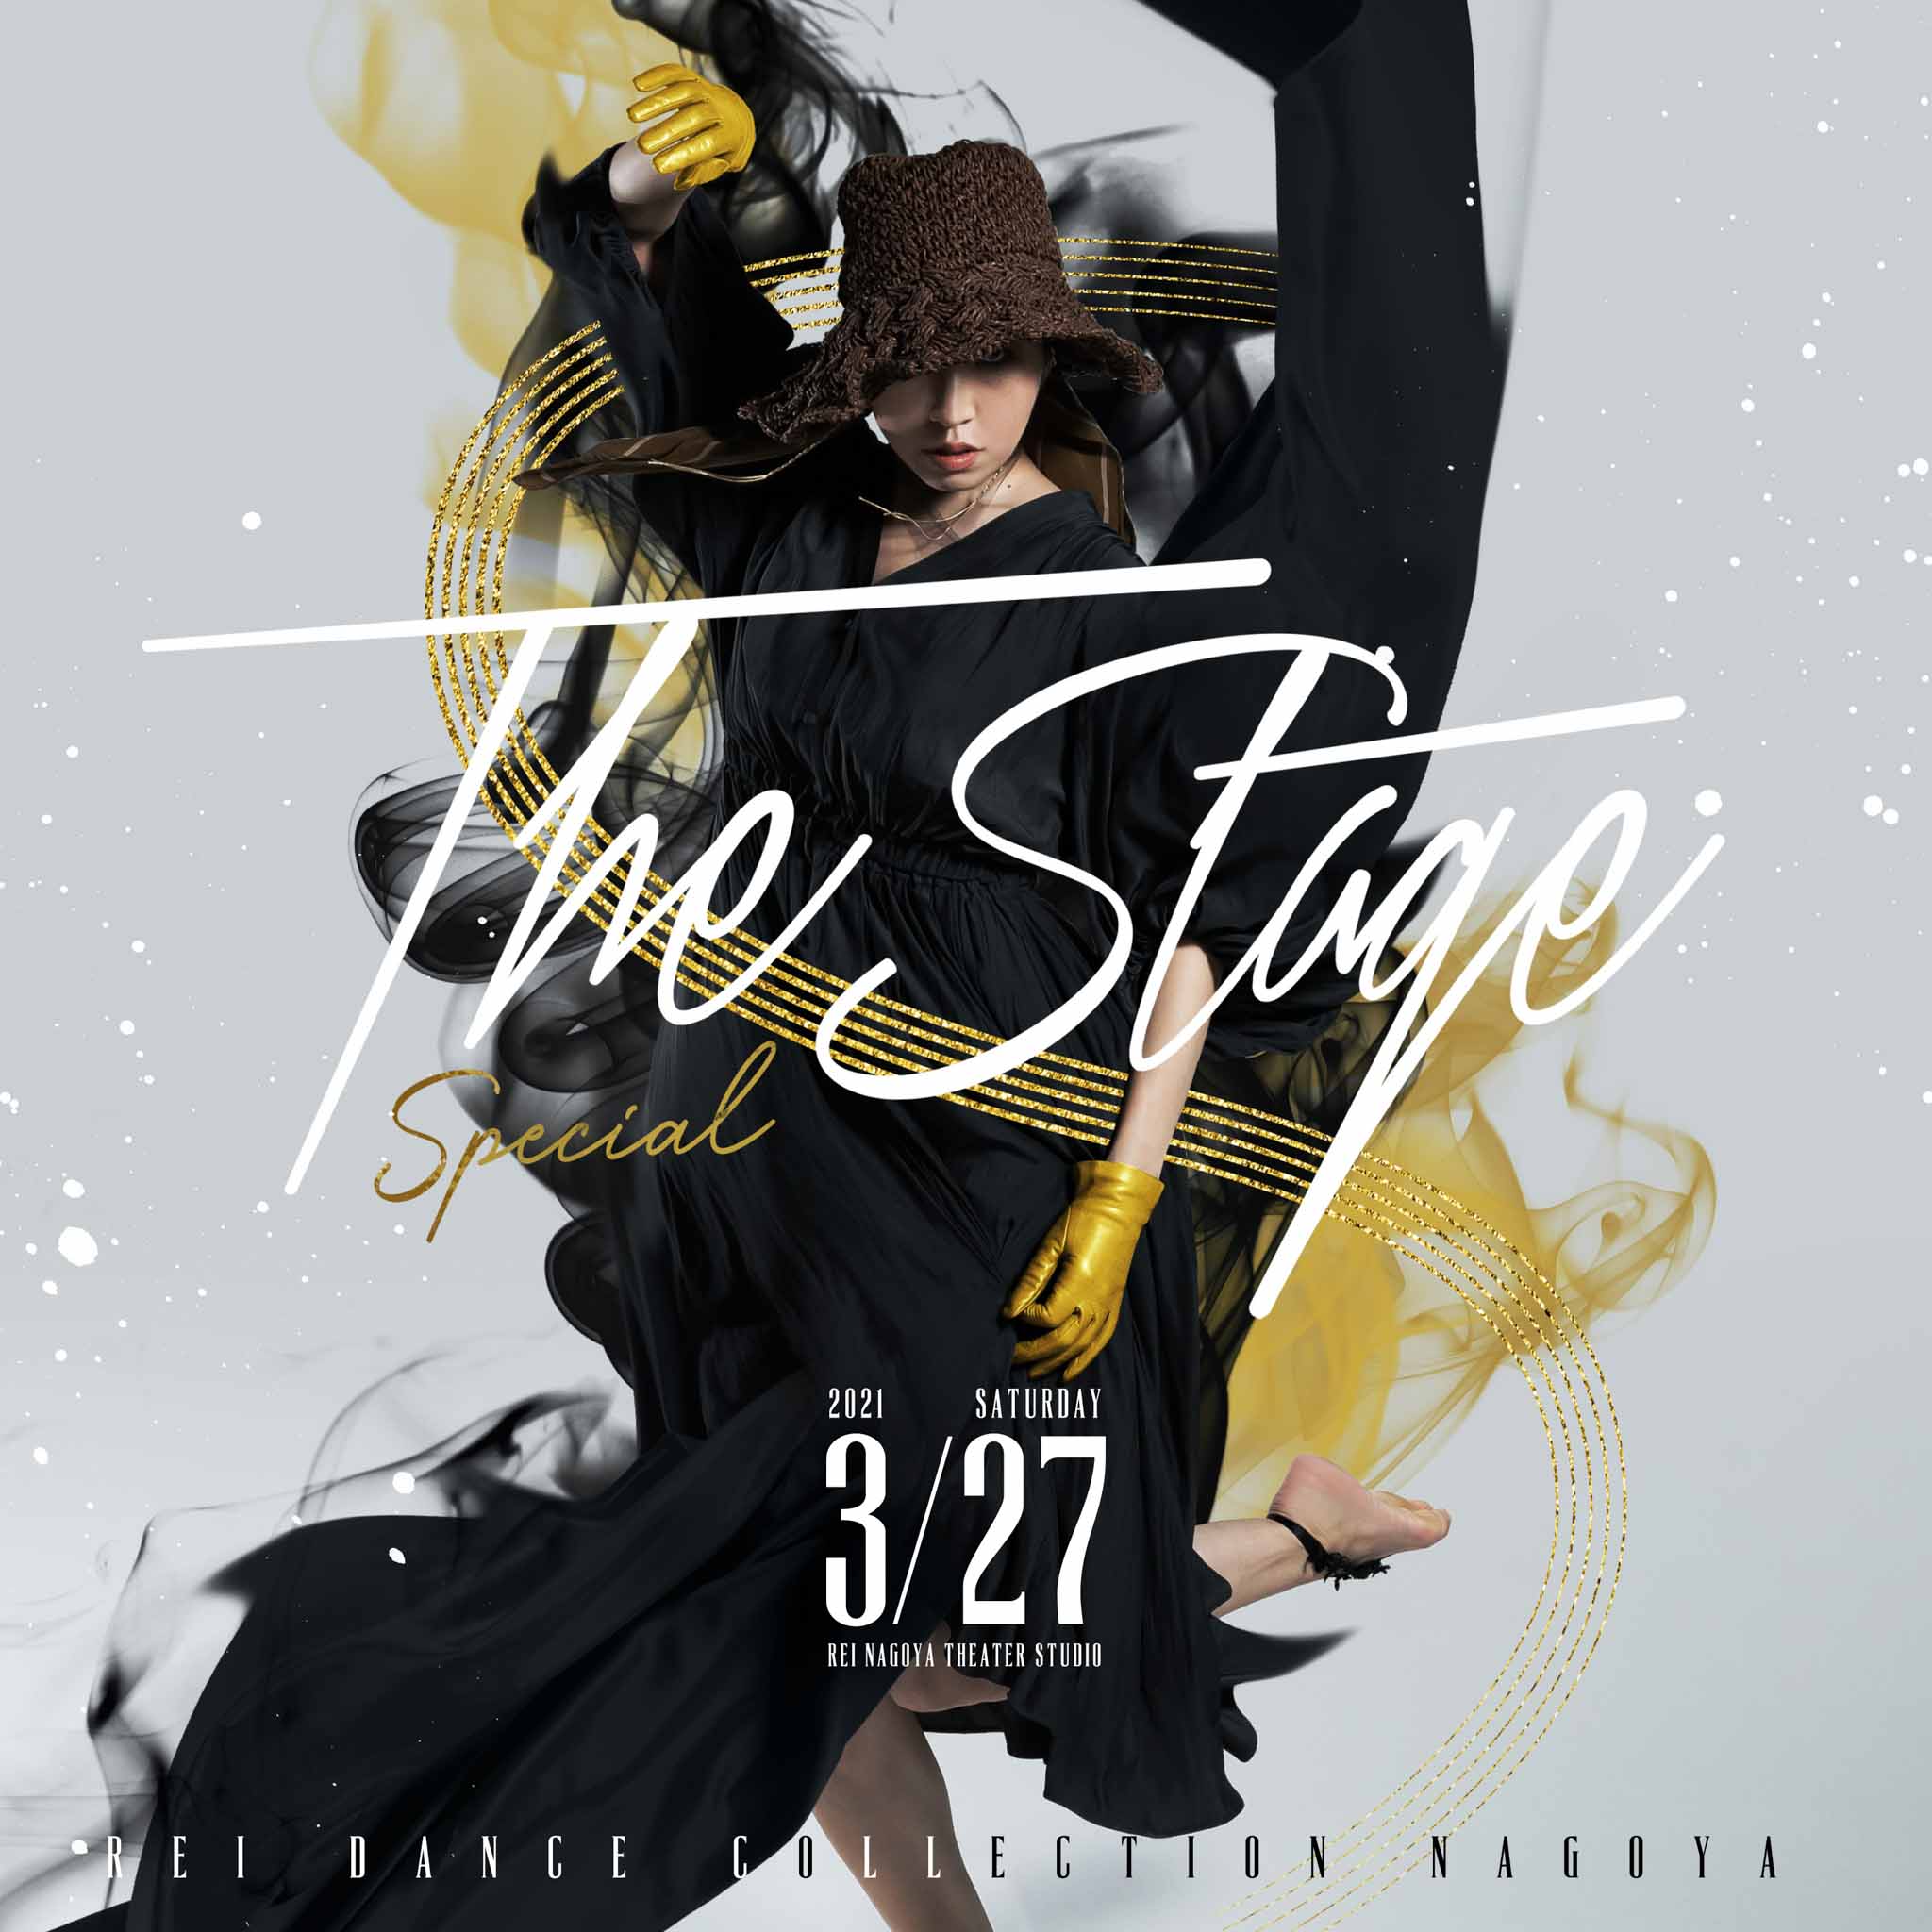 THE STAGE special